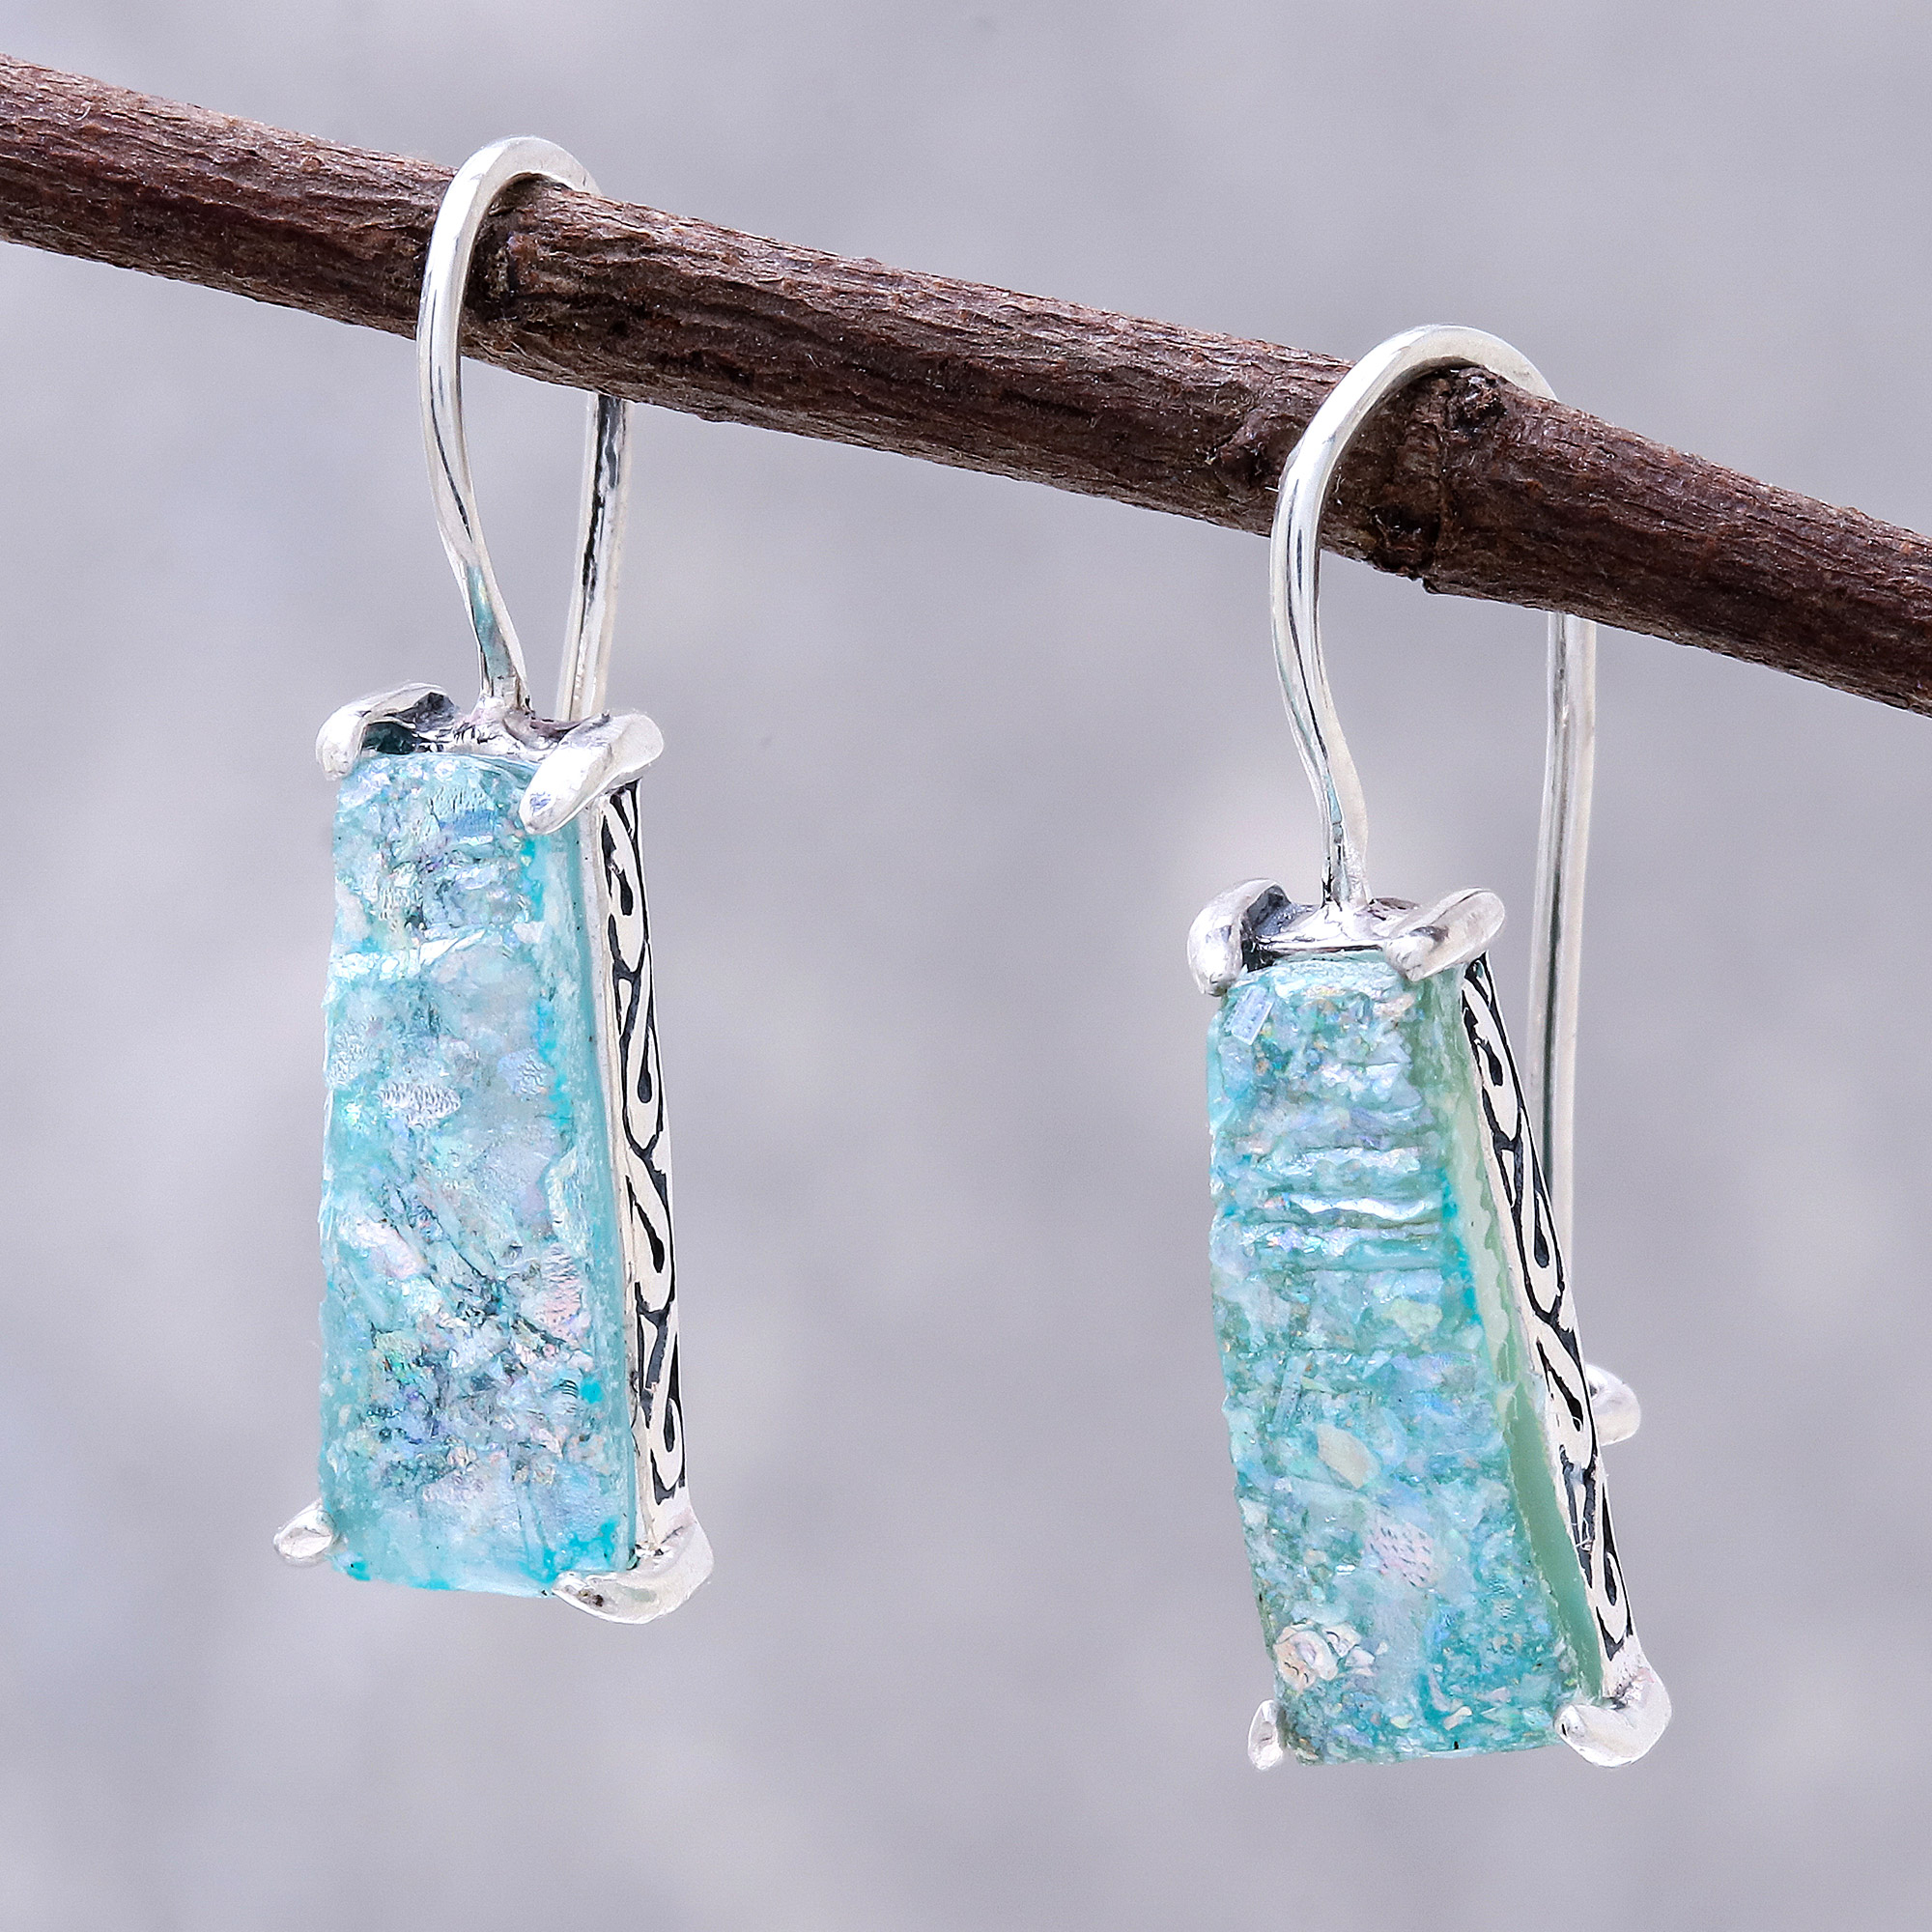 Handcrafted Roman Glass Drop Earrings from Thailand, 'Roman Towers'